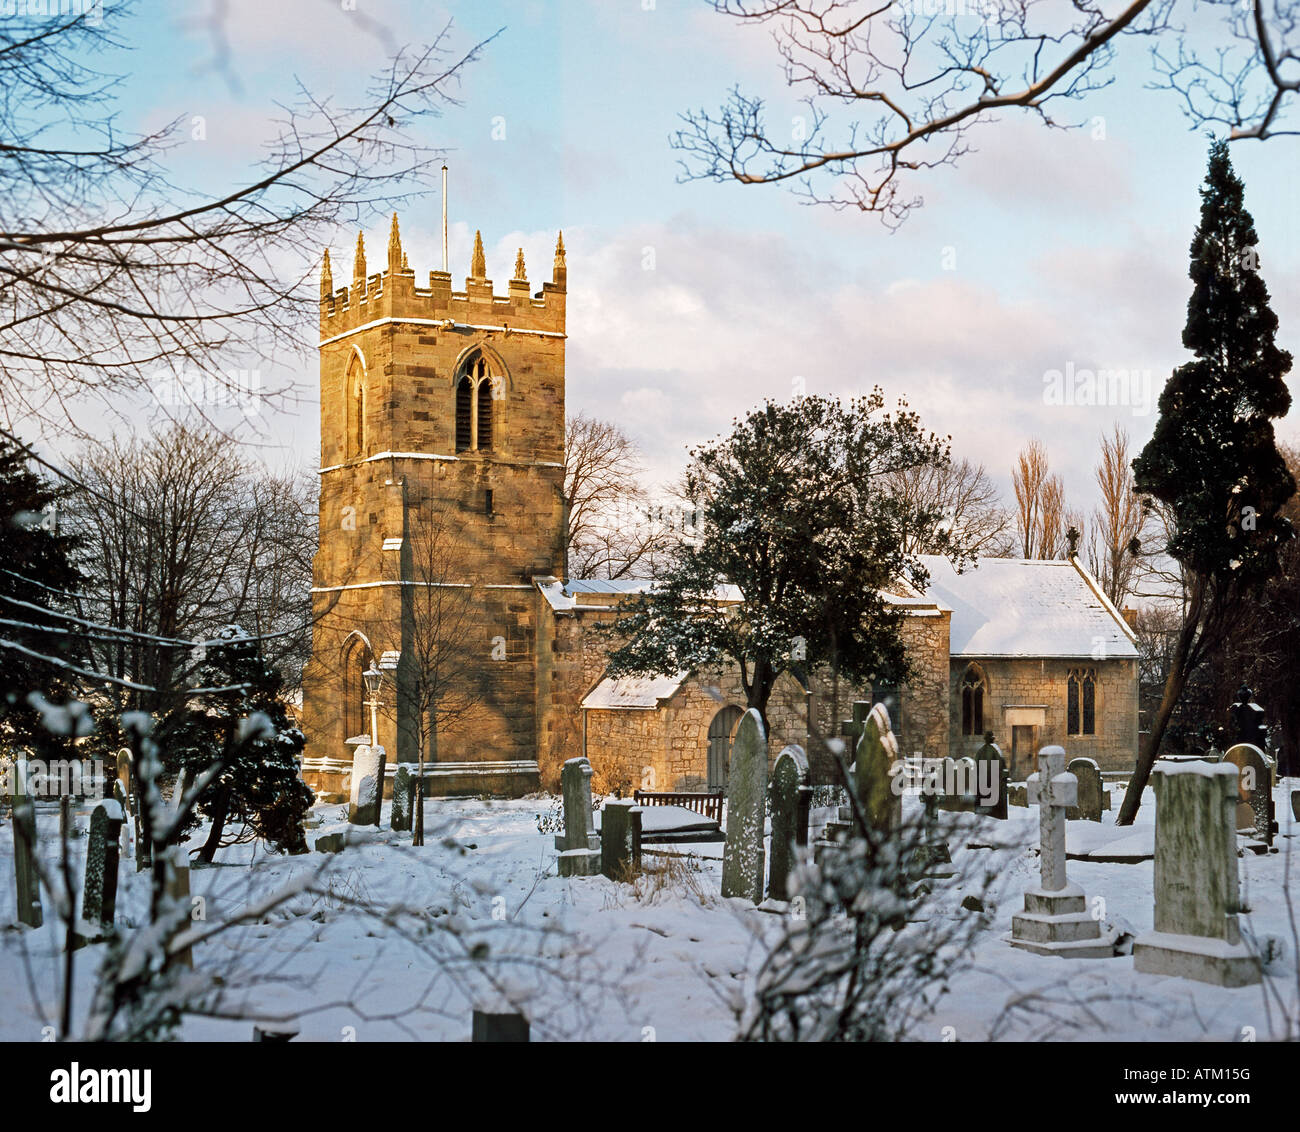 English country church in snow Stock Photo 16345227 Alamy